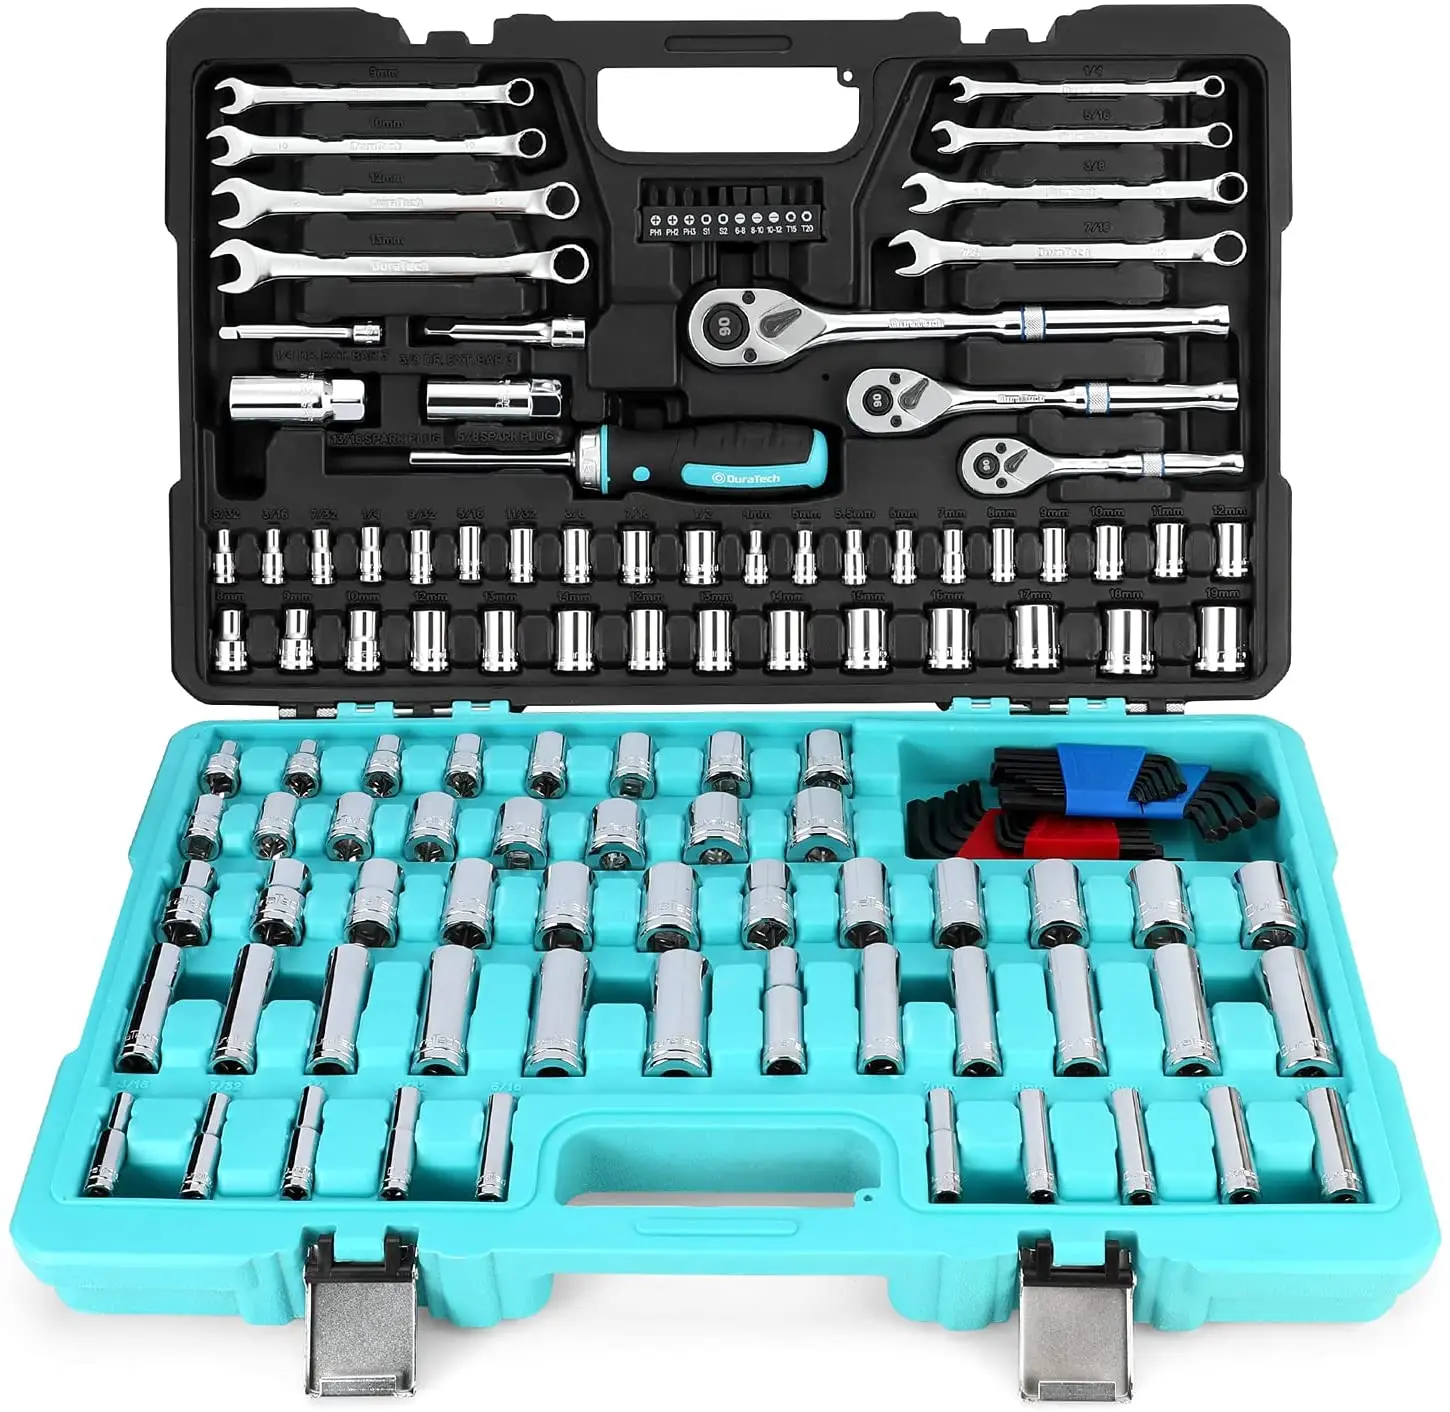 Mechanic Tool Kit and Socket Set,Include Metric Sockets,72-Tooth Ratchet and Wrench Set for Auto Repair